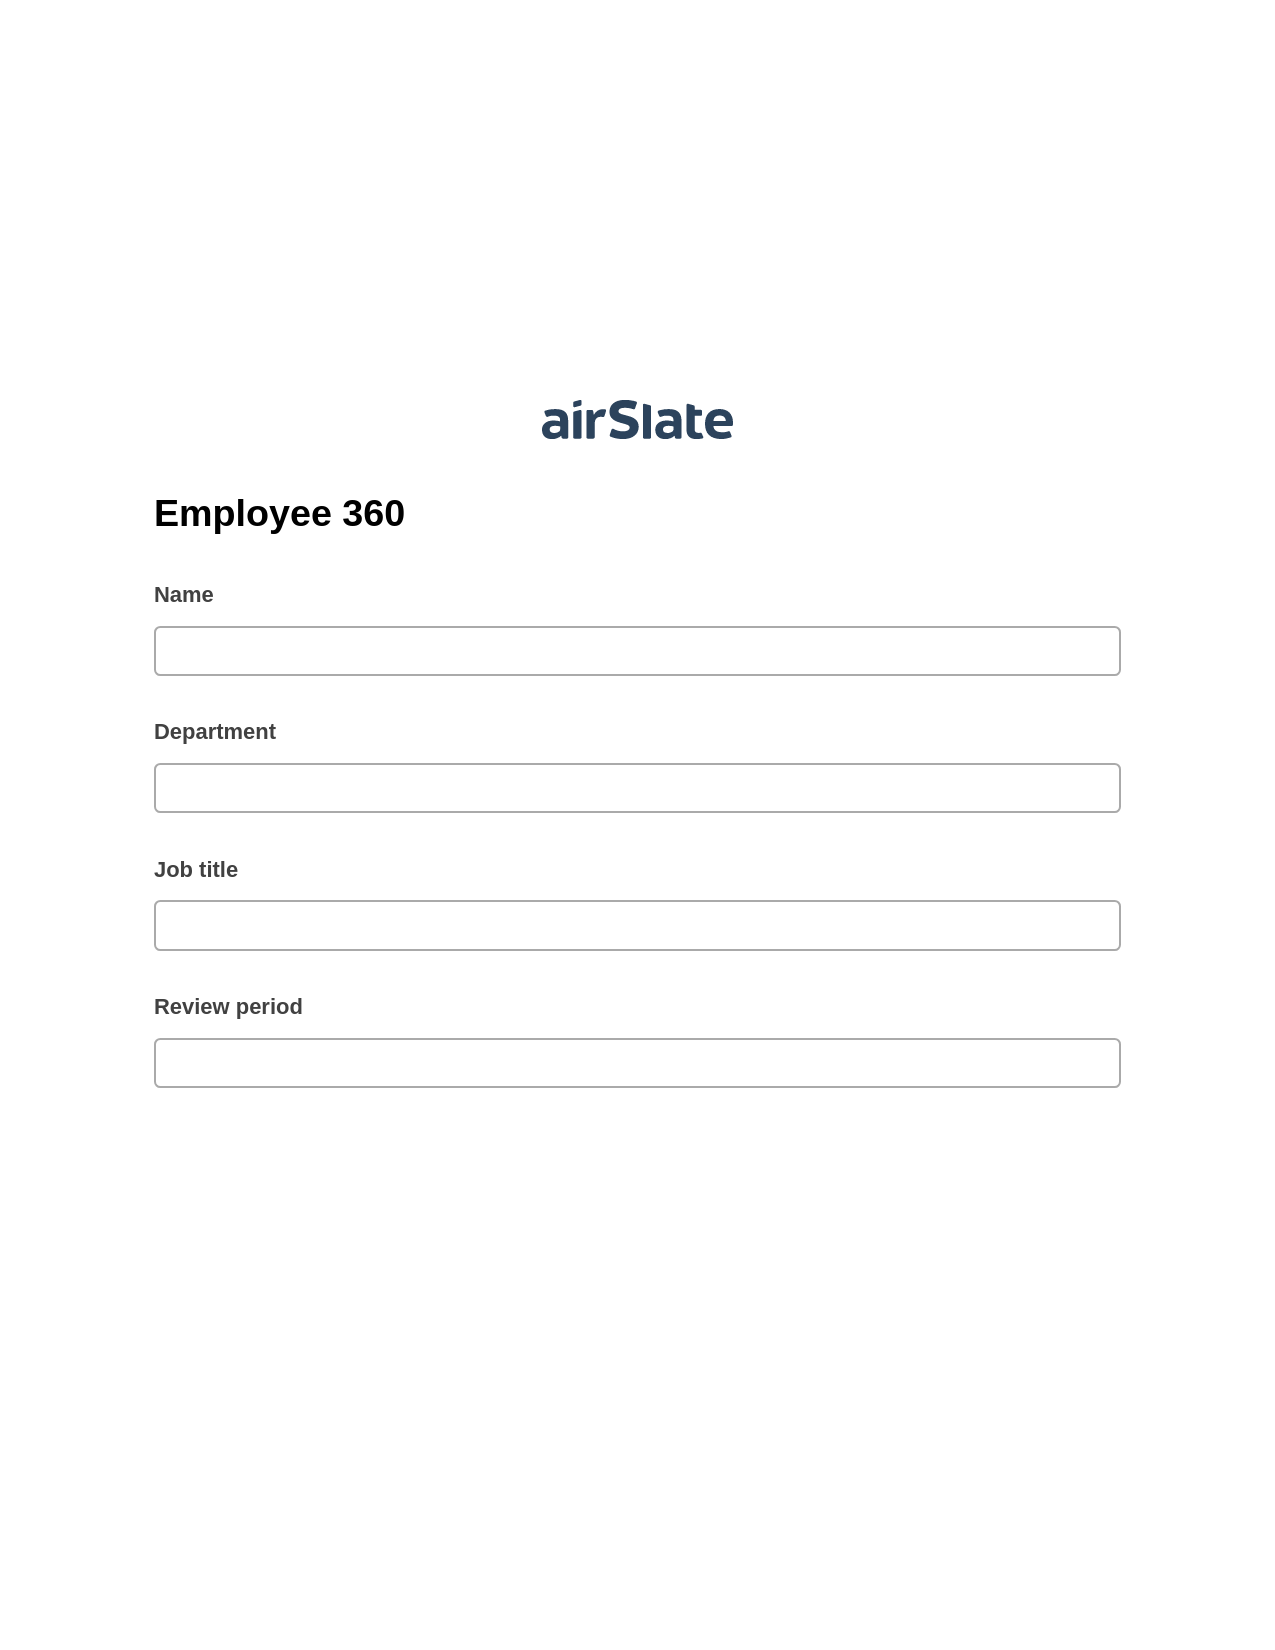 Employee 360 Pre-fill from another Slate Bot, Invoke Salesforce Process Bot, Archive to Dropbox Bot